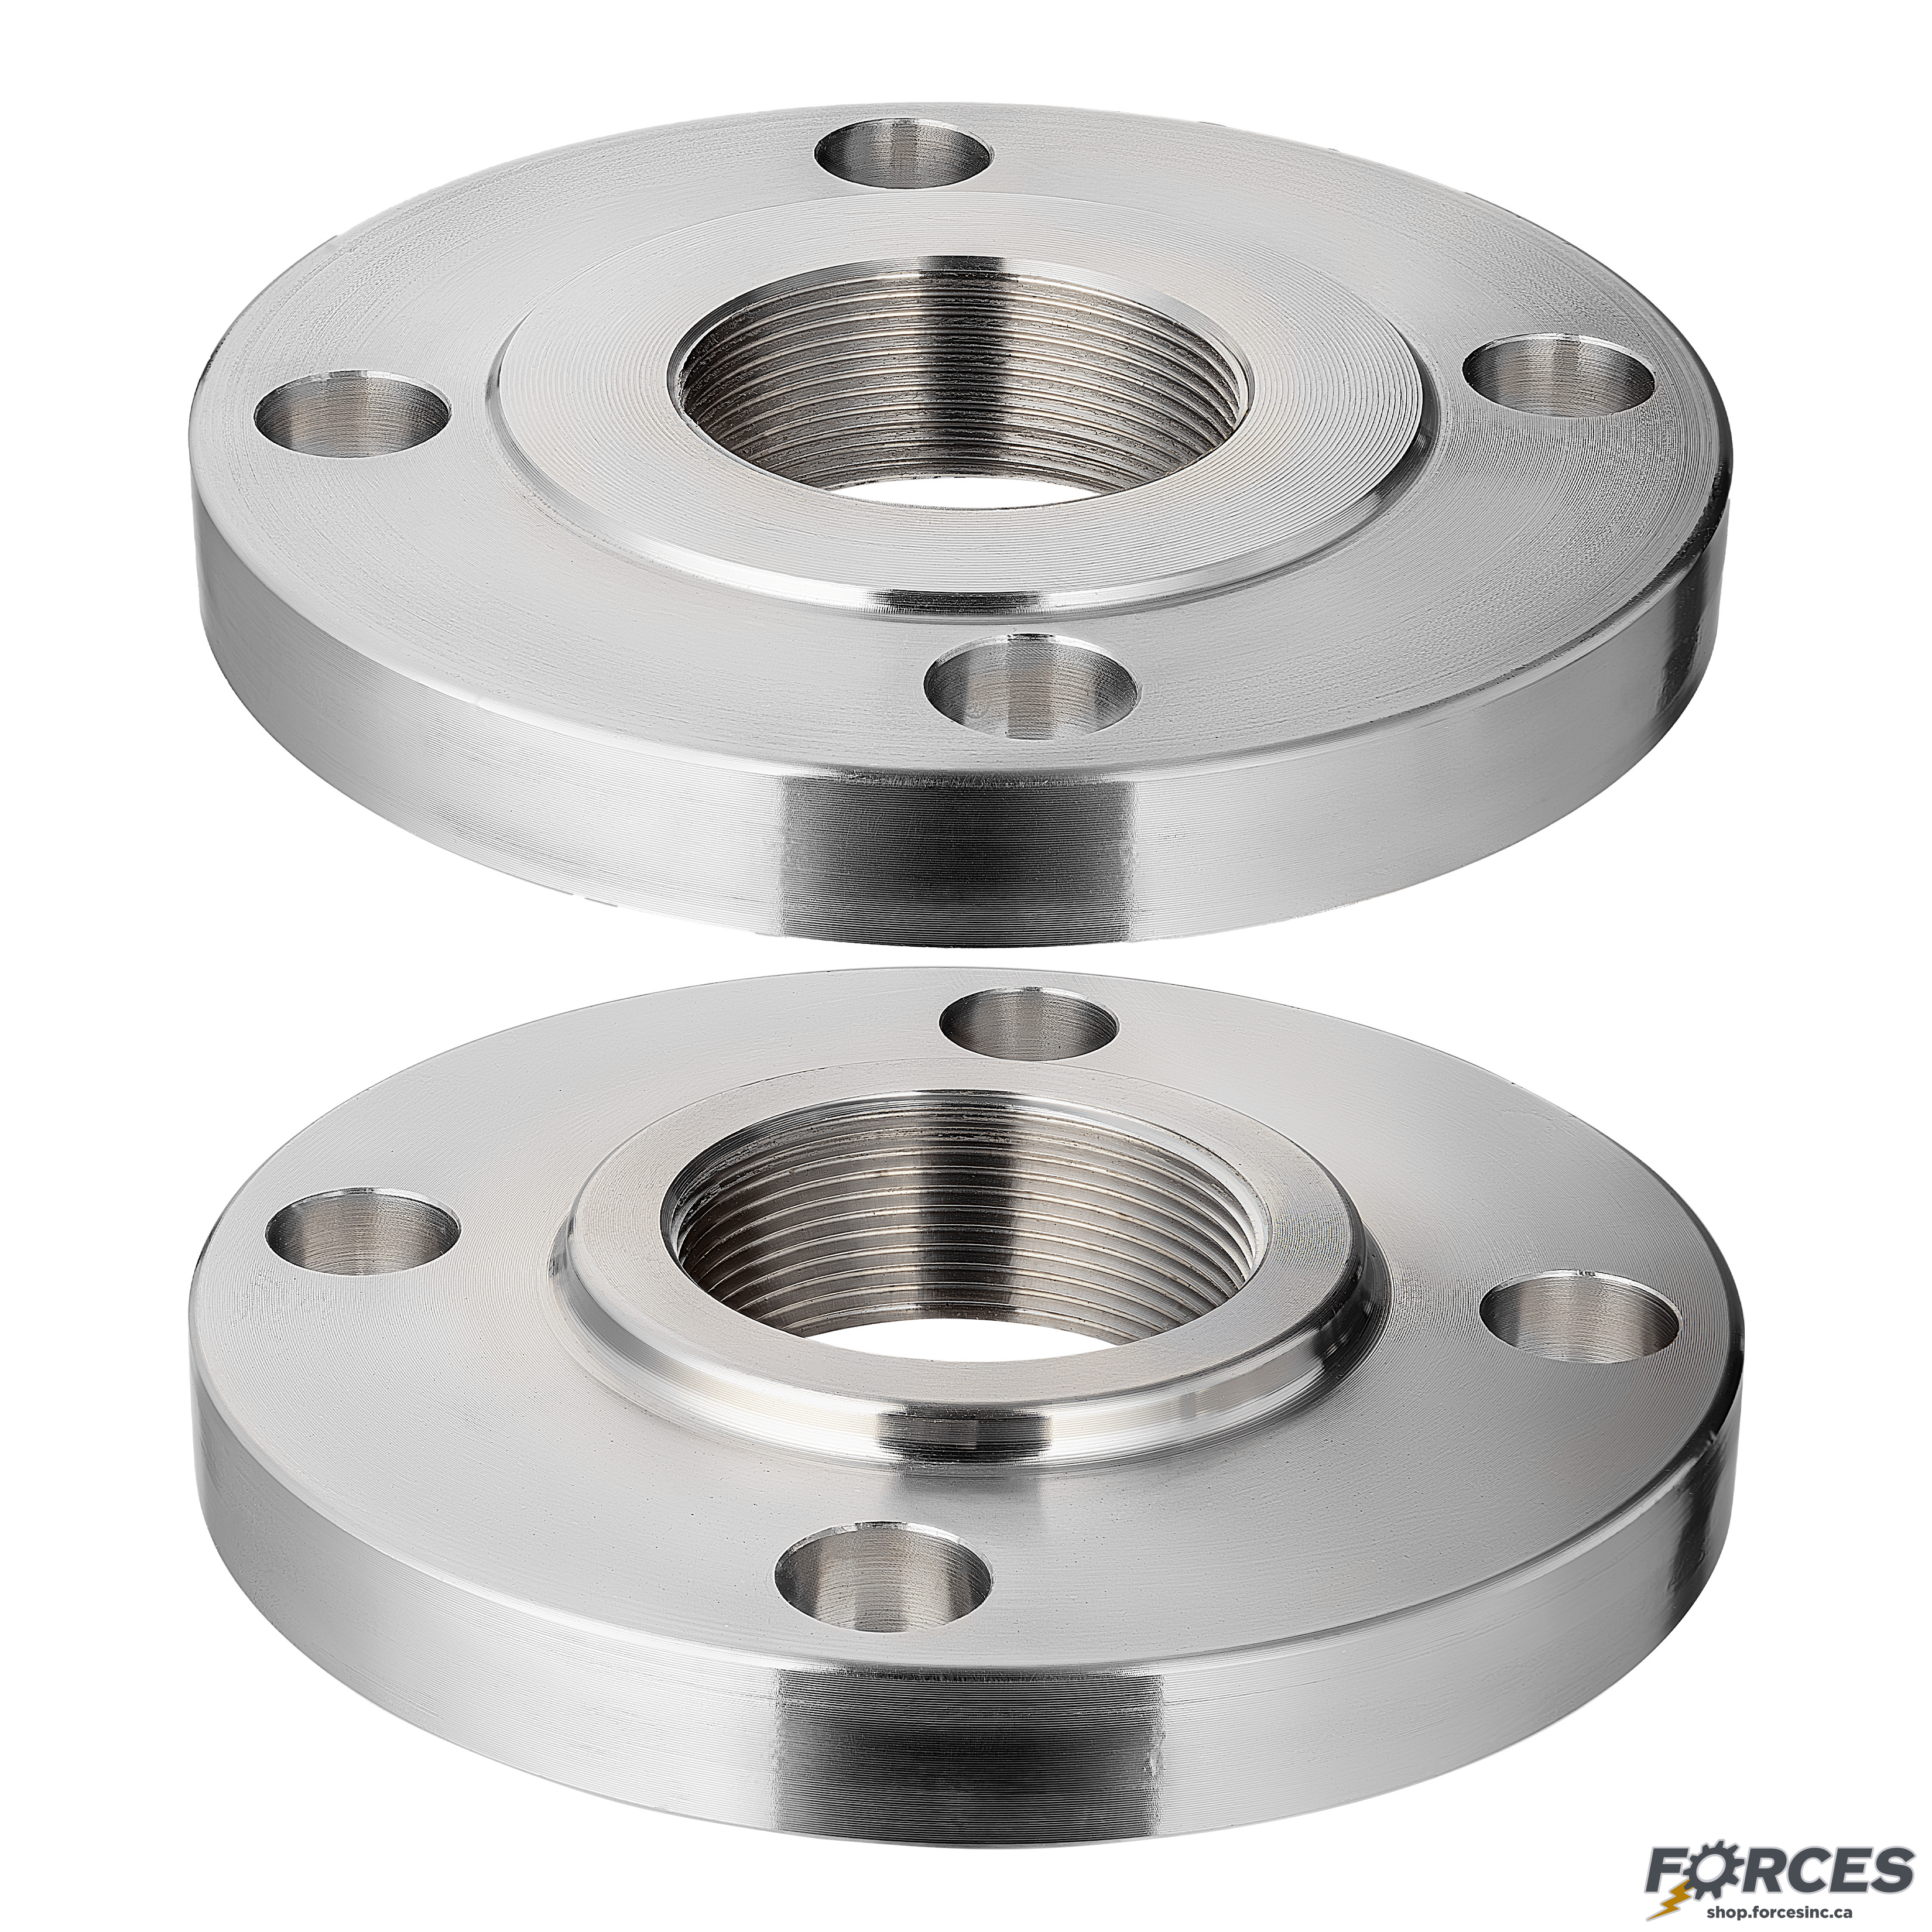 1/2" Threaded Flange NPT Class #150 - Stainless Steel 316 - Forces Inc